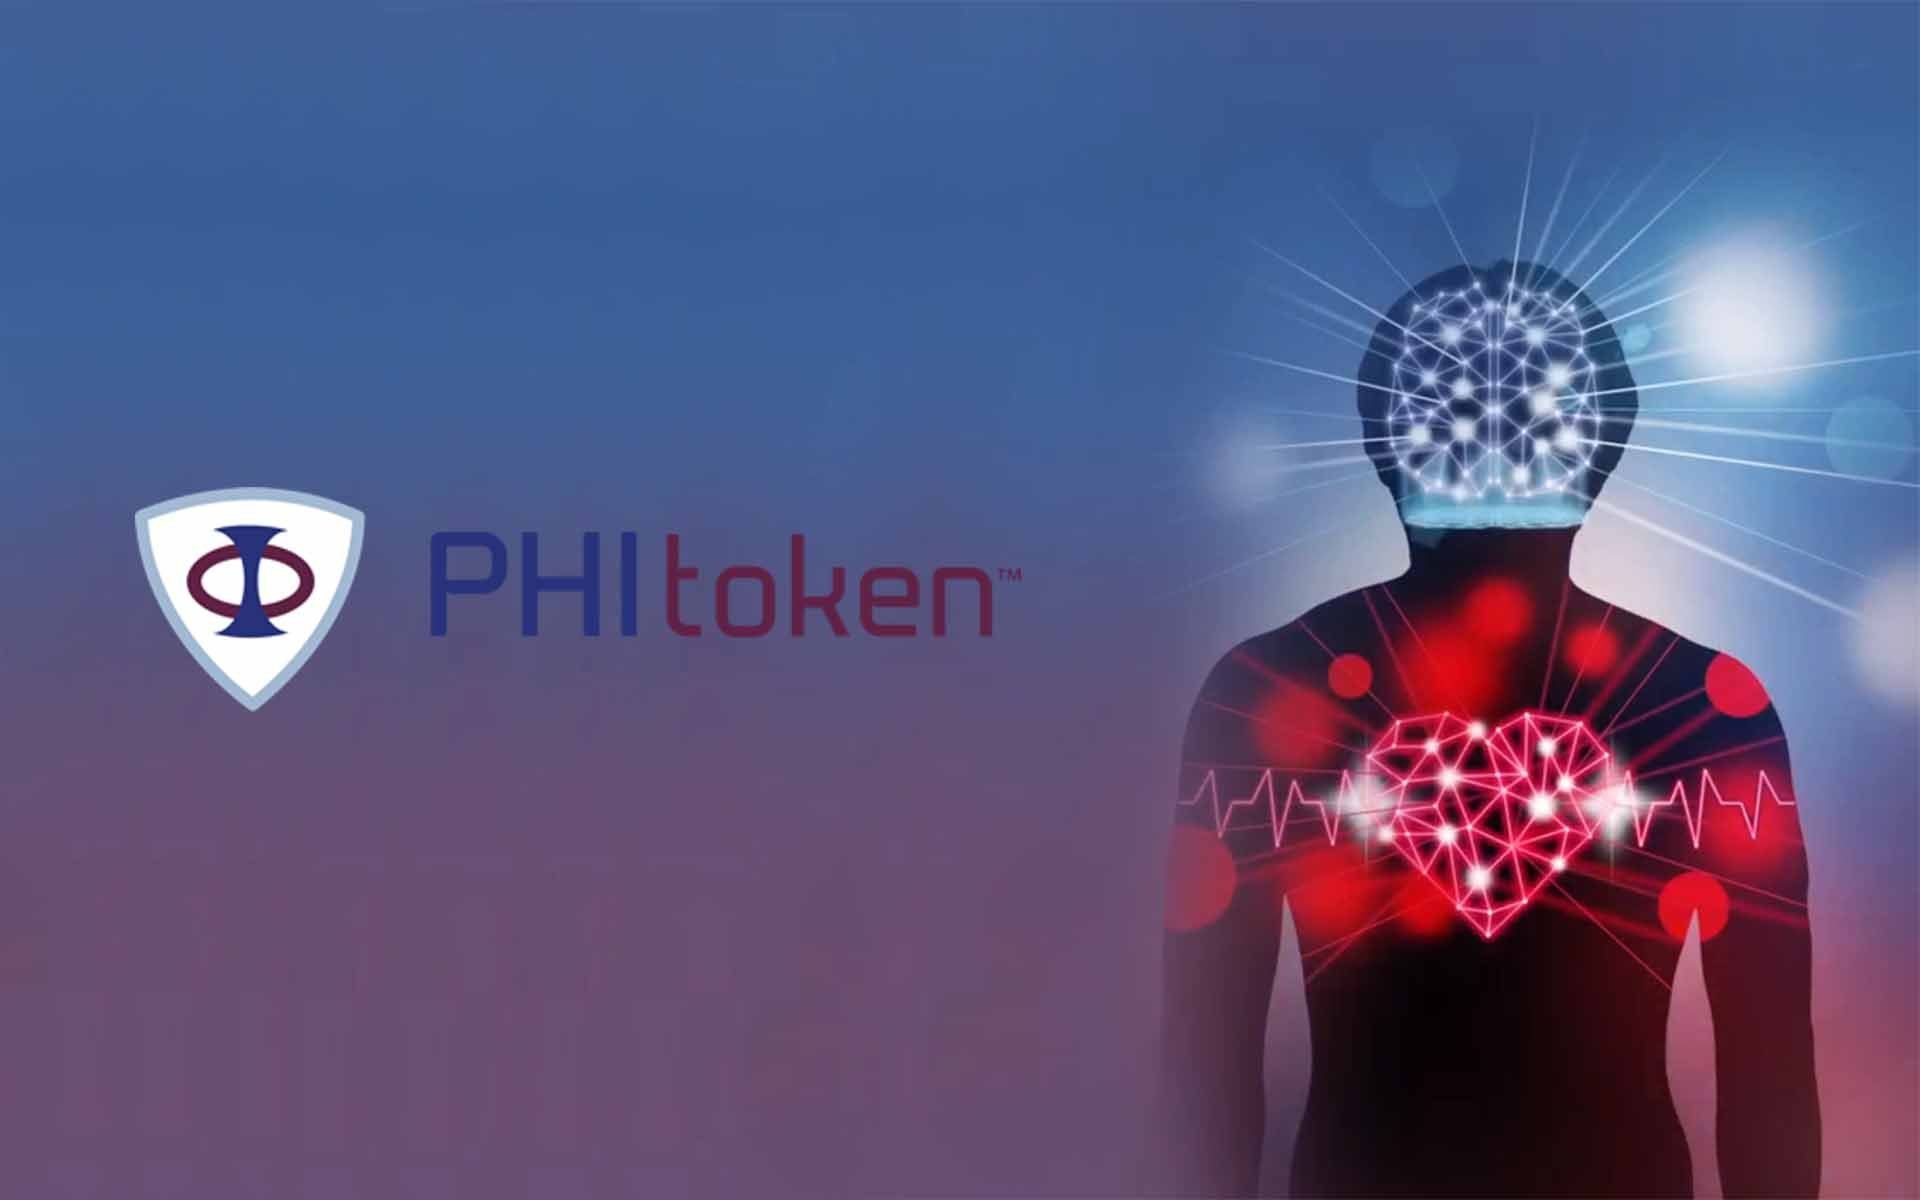 World’s First Hybrid Investment Platform, Phi Token, Raises £4.7m in First Two Days of Pre-ICO Sale